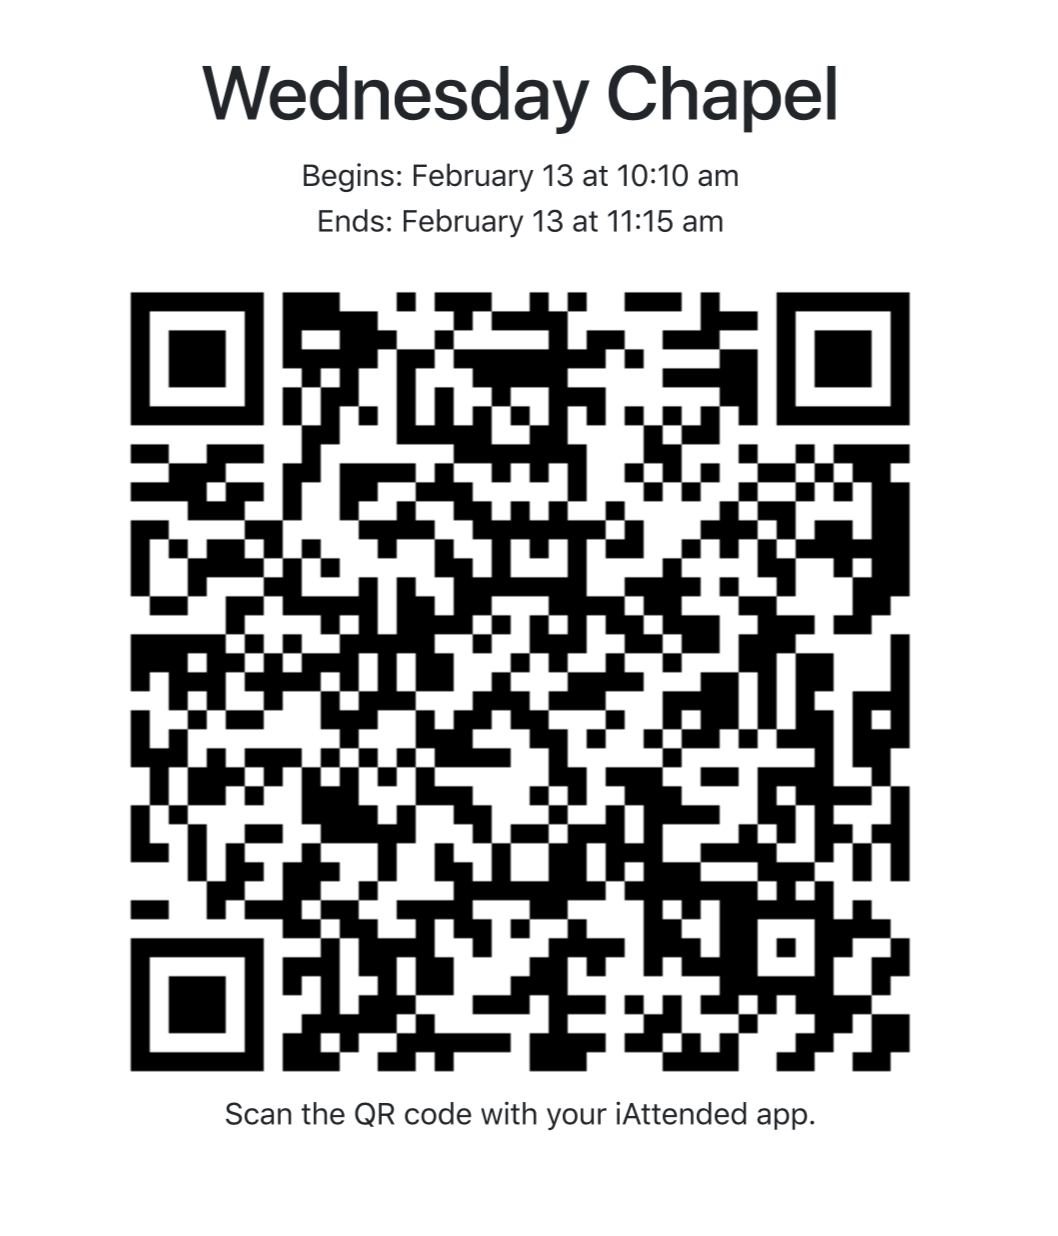 Sample image of qr code used to scan students into an event